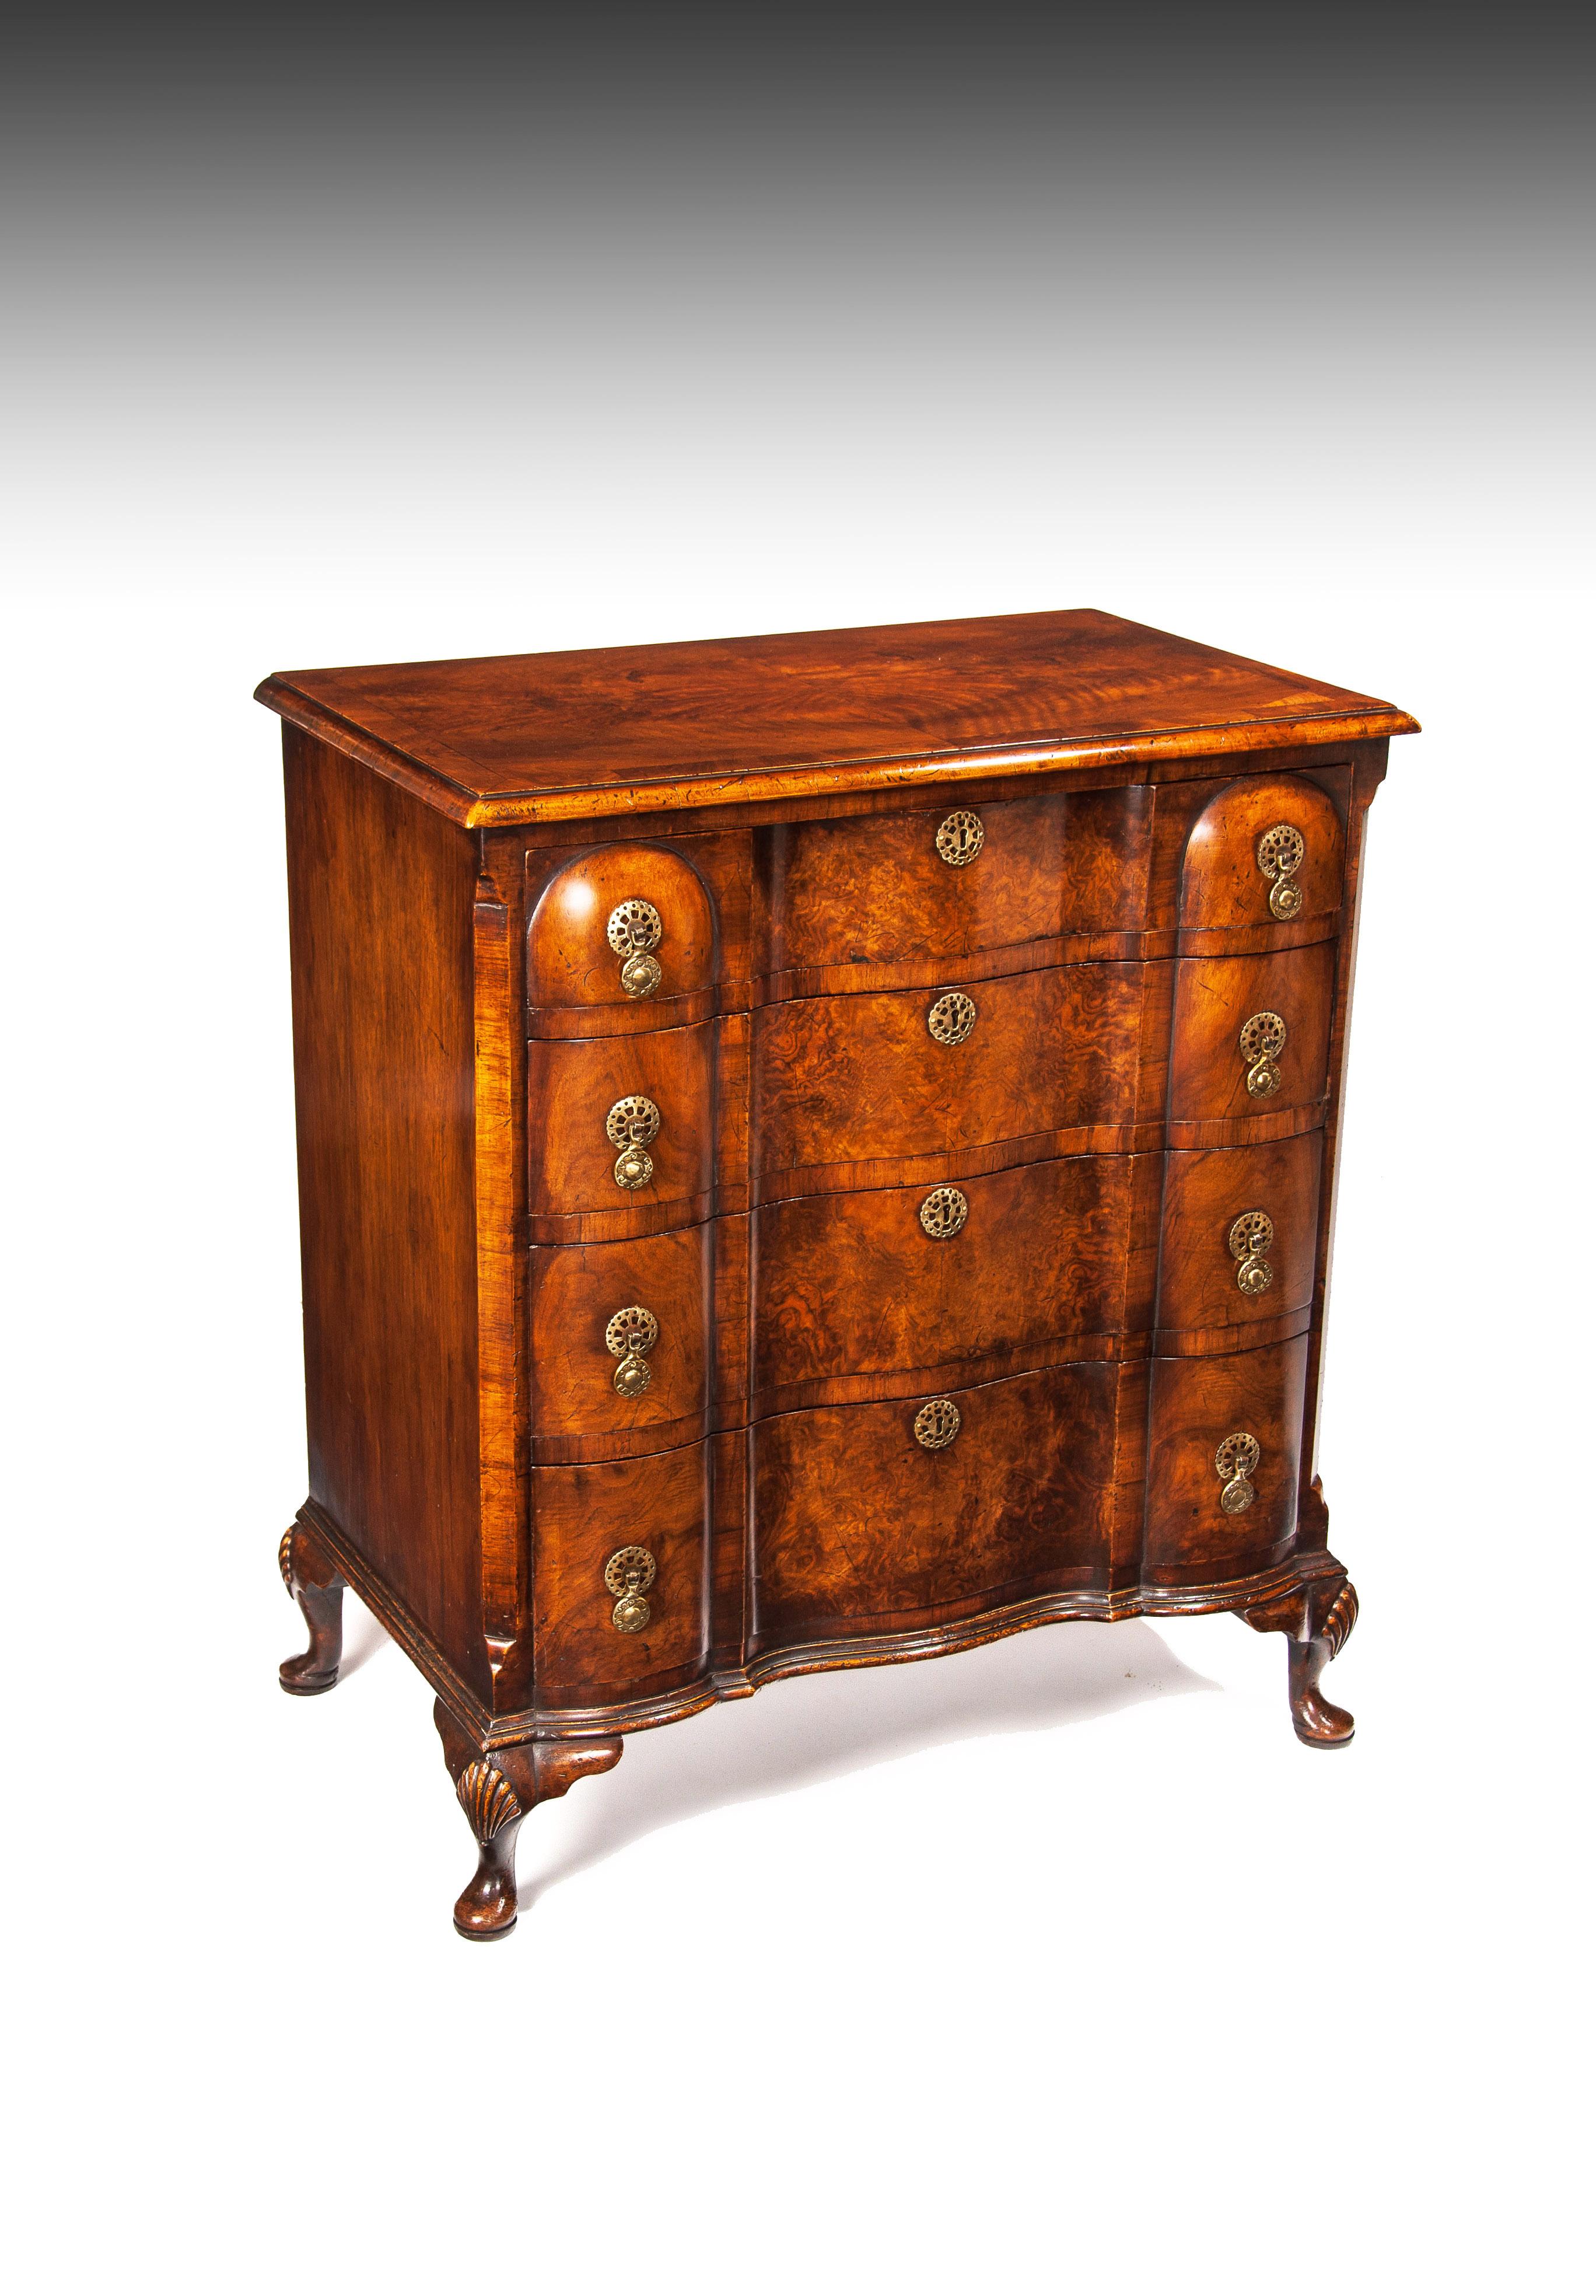 English Antique Walnut Queen Anne Style Shaped Front Chest of Drawers